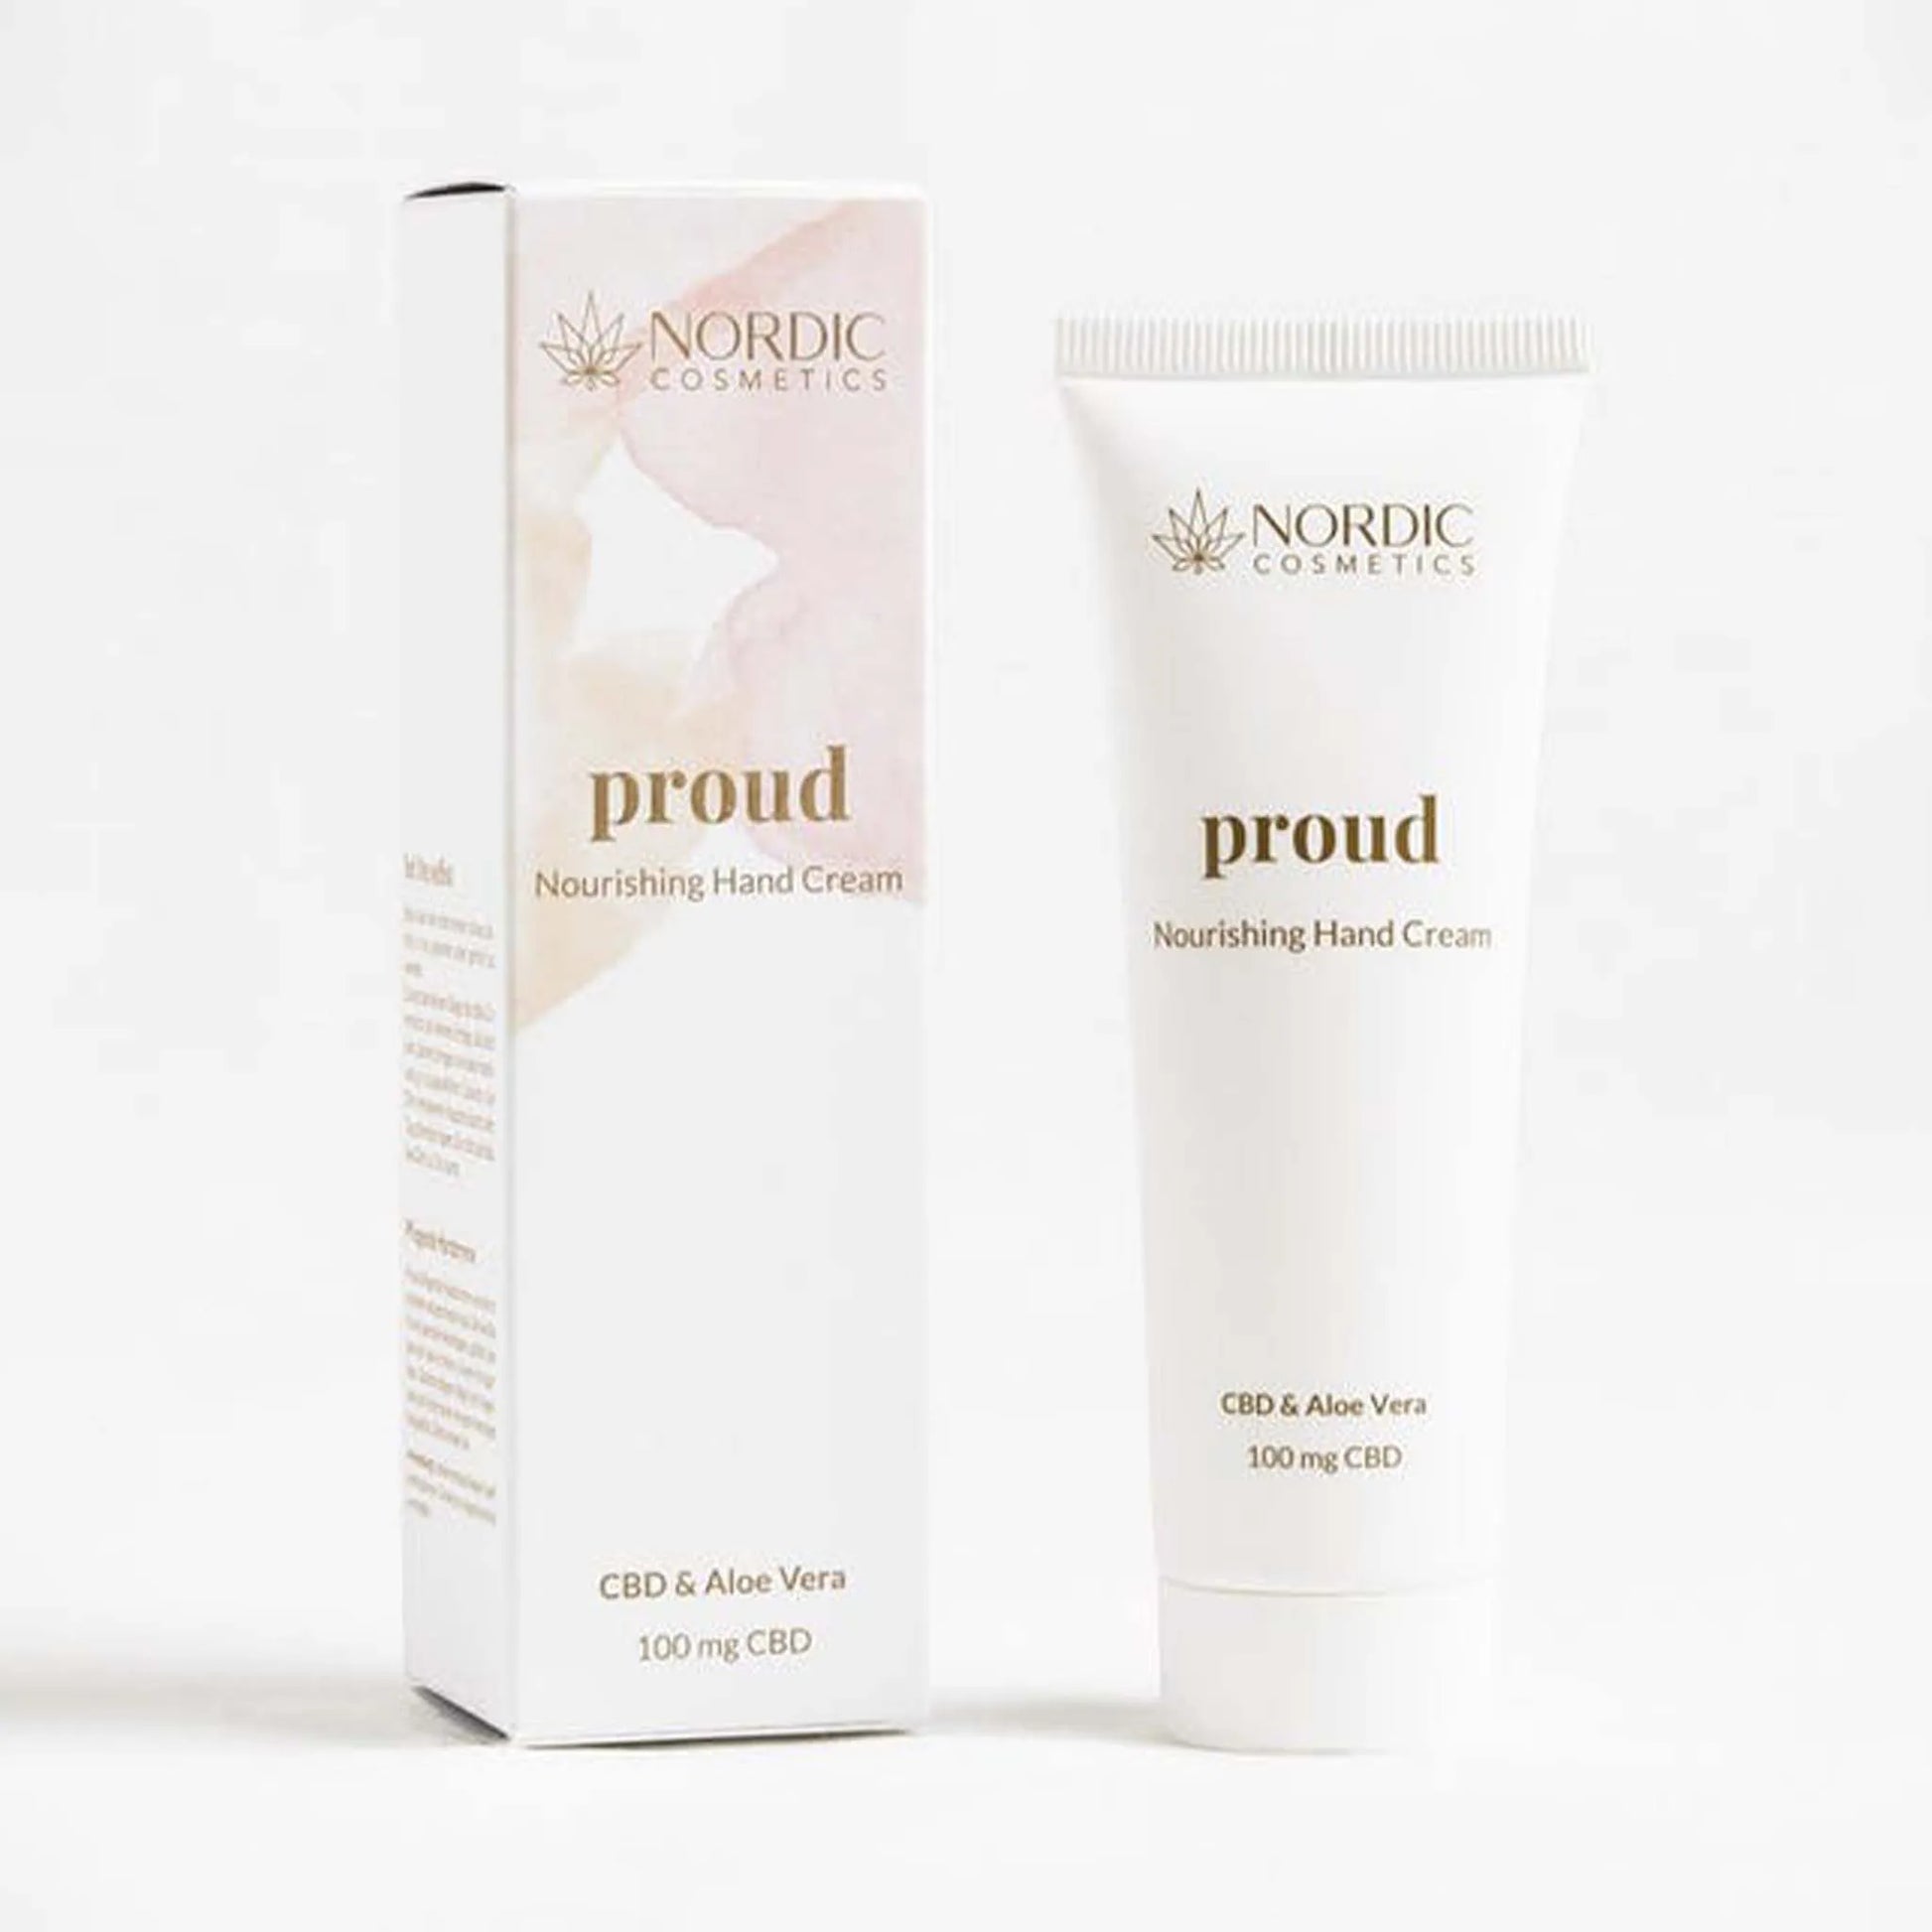 hand cream - product and. packaging